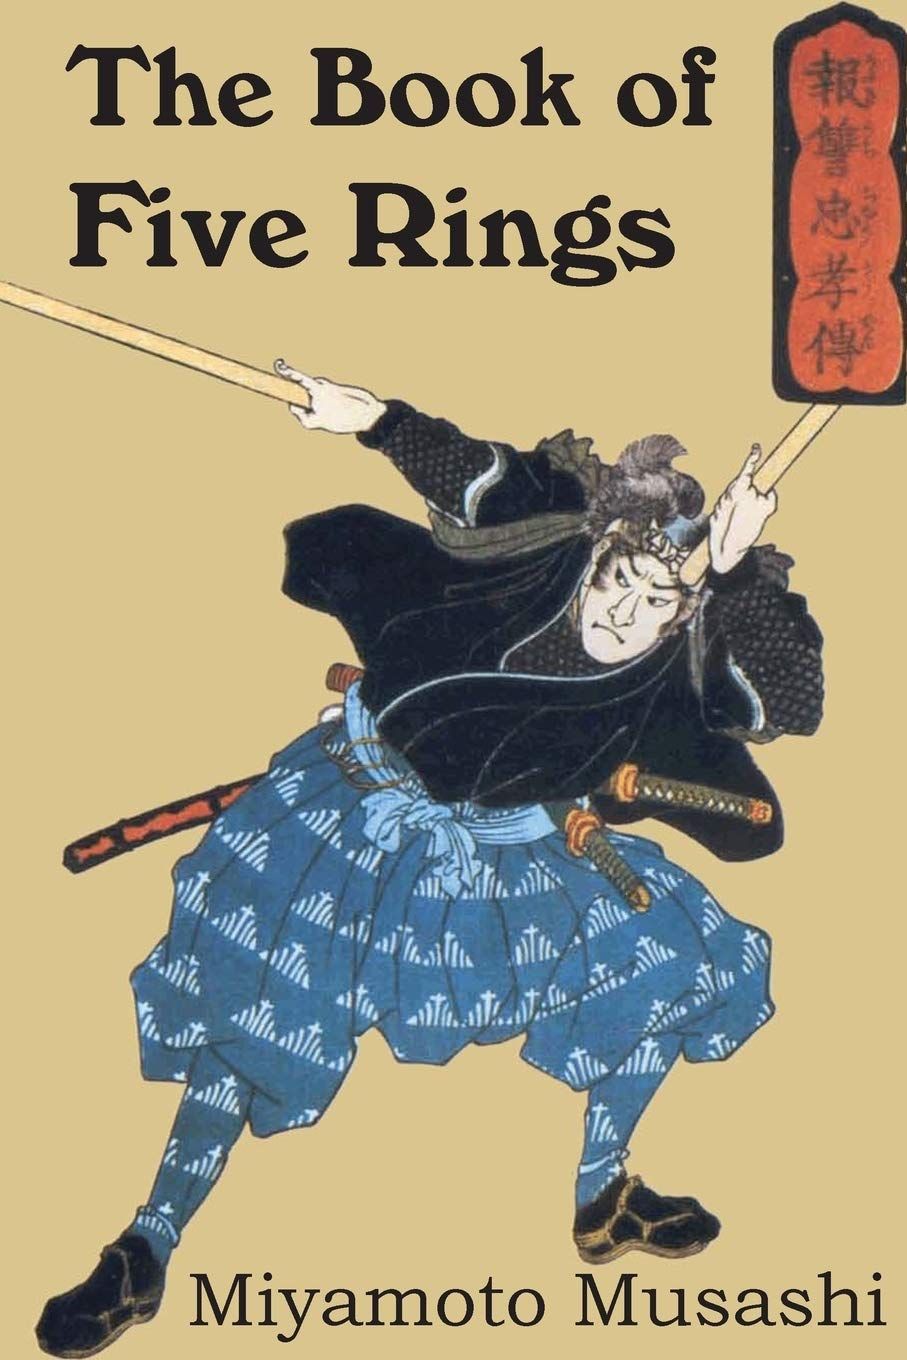 Book 'The Book of Five Rings'